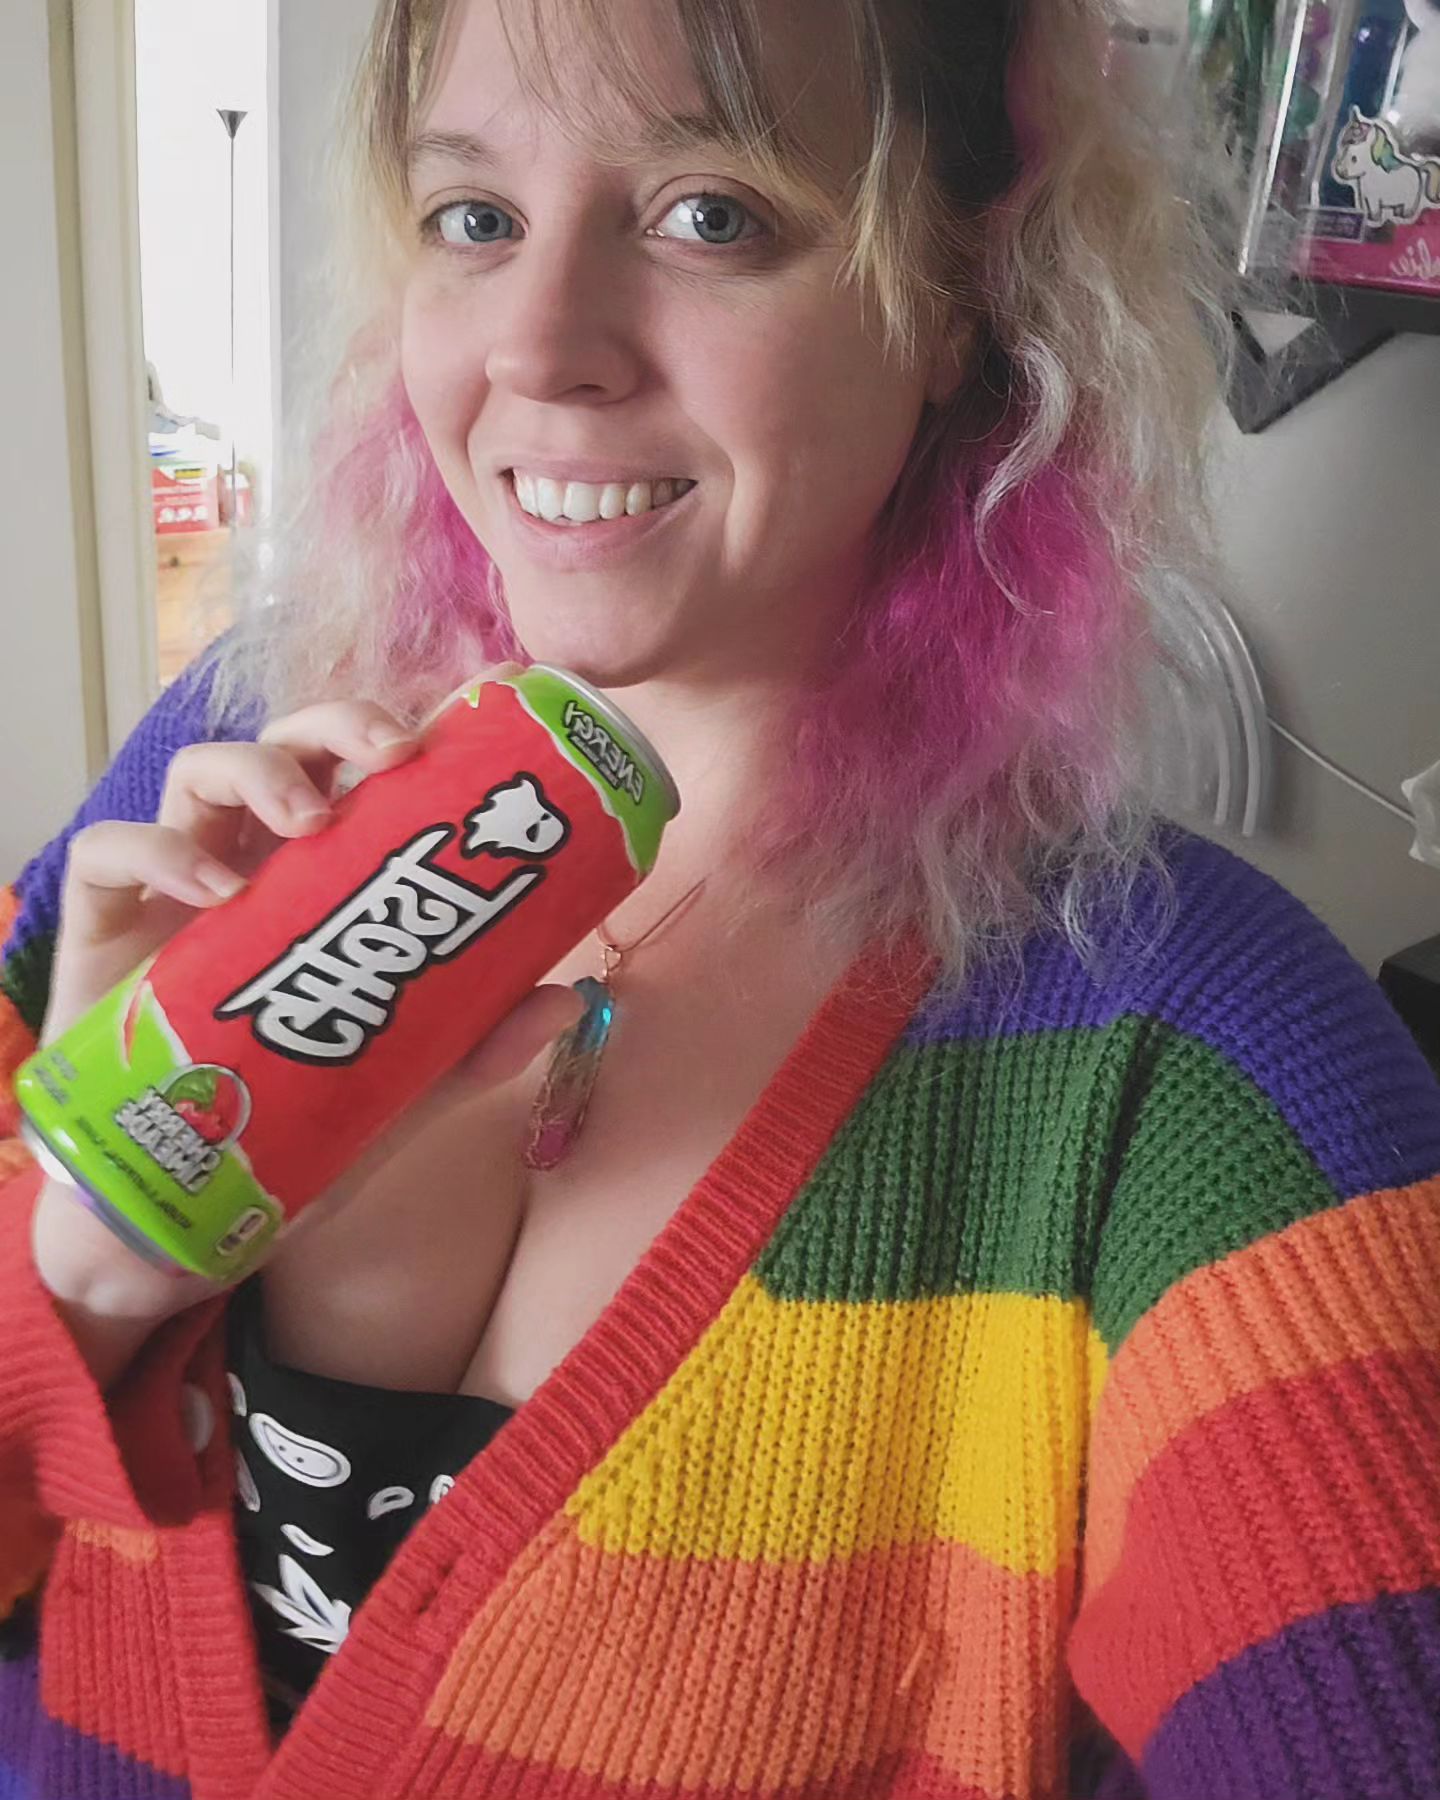 Lil energy booster for the rest of the afternoon. Even vacation days can be draining! #ghostenergy
💕❤️🧡💛💚💙💜💕

🦄
🌈
🦄
🌈
🦄
🌈
🦄

links in bio ❤️

#twitch #twitchaffiliate #supportsmallstreamers #smallstreamer #streamergirl #gaming #gamer #girlgamer #gamergirl #gamerlife #pcgaming #happy #positivevibes #instamood #cute #twitchgirls #thickwomen #rainbow #unicorn #bekind #bekindtoyourself